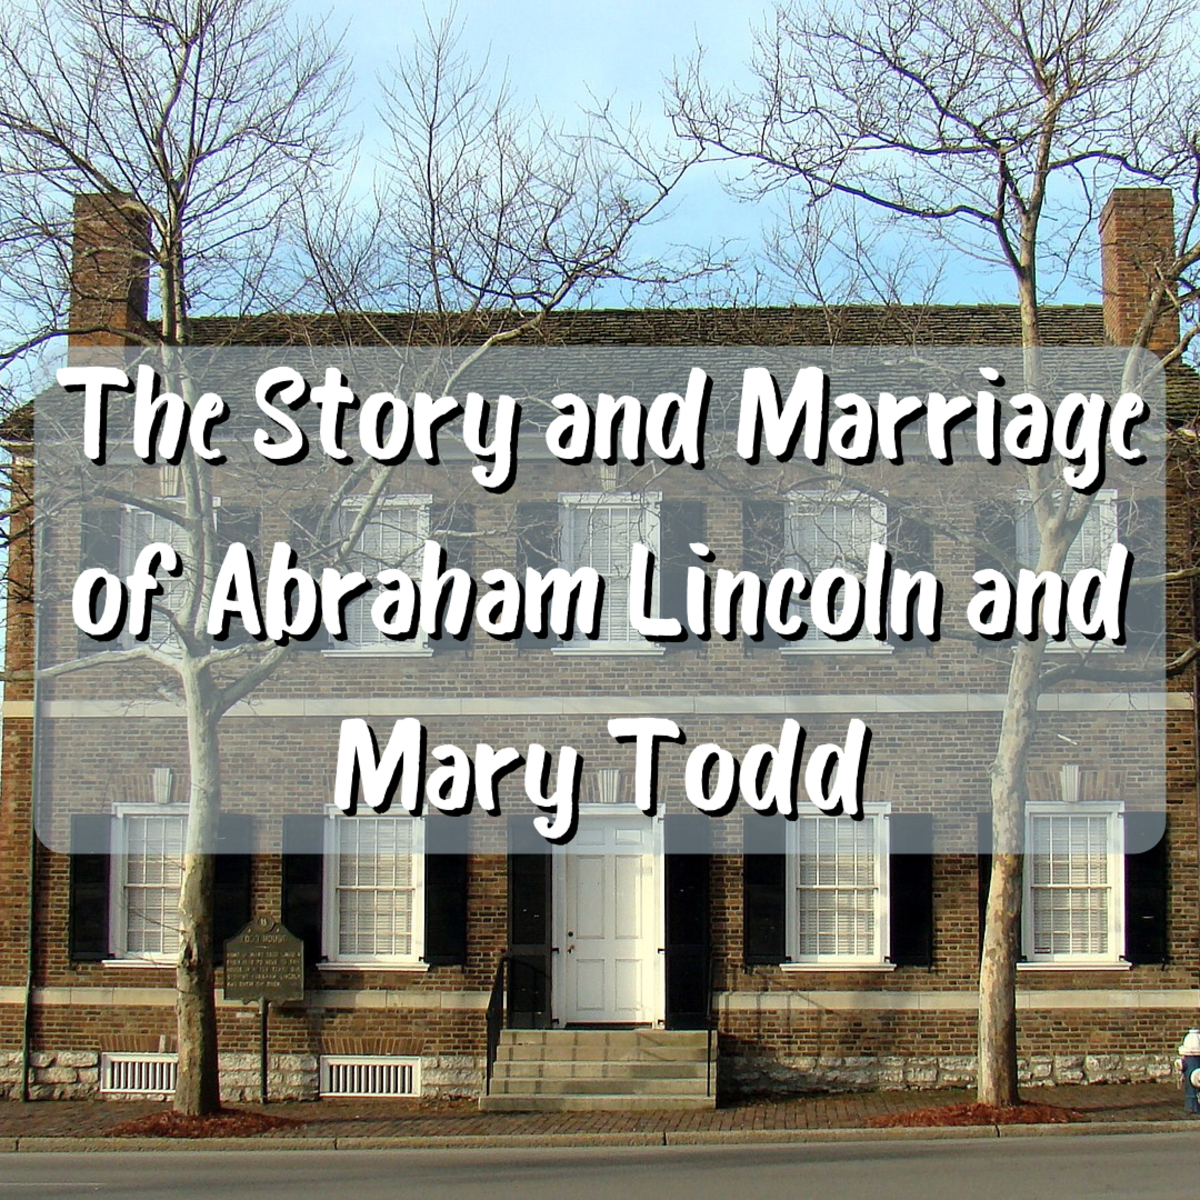 The Story of Abraham Lincoln and Mary Todd